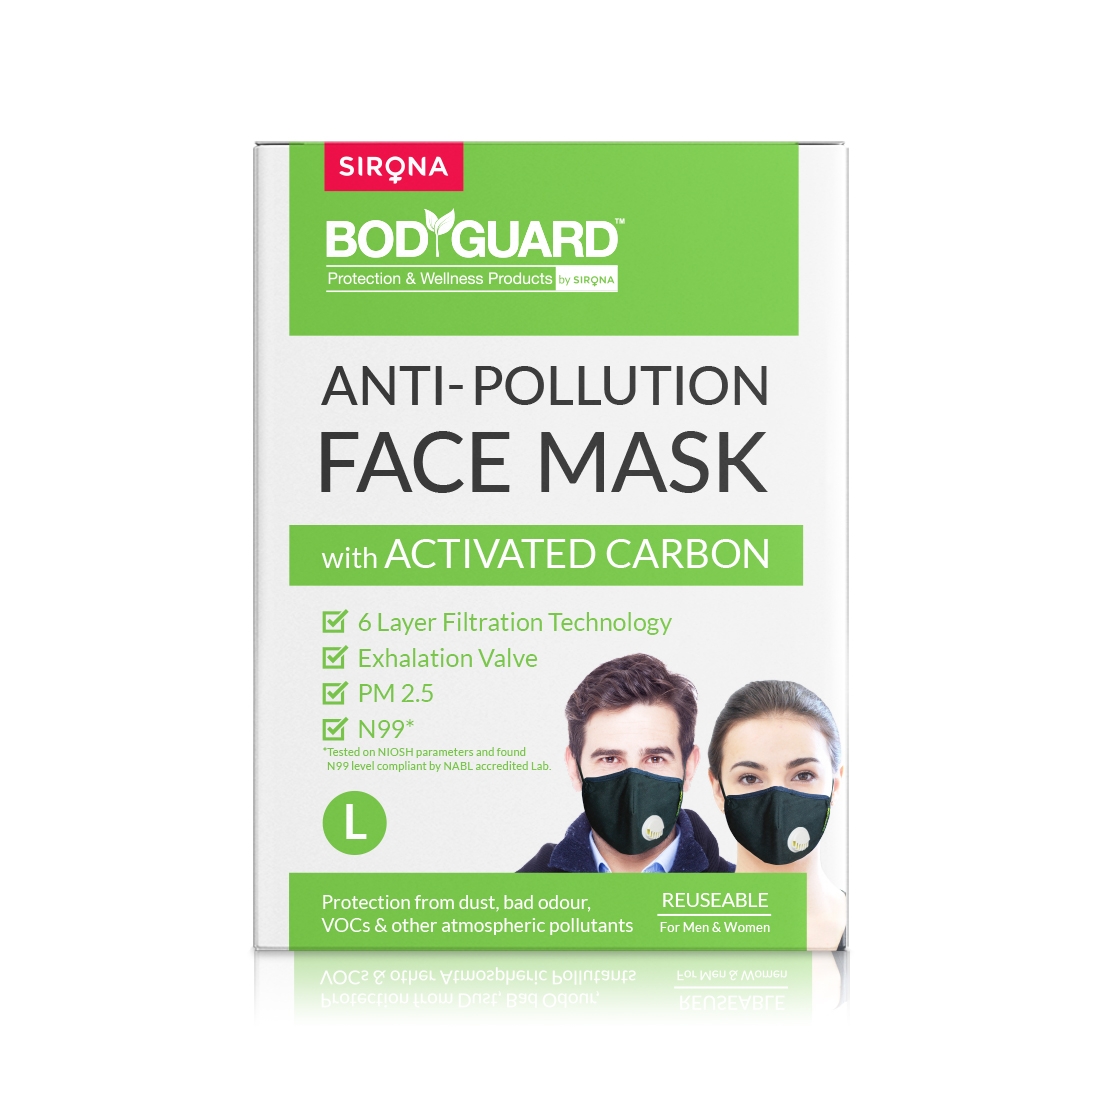 Bodyguard | Bodyguard Reusable Anti Pollution Face Mask with Activated Carbon, N99 + PM2.5 for Men and Women - Large